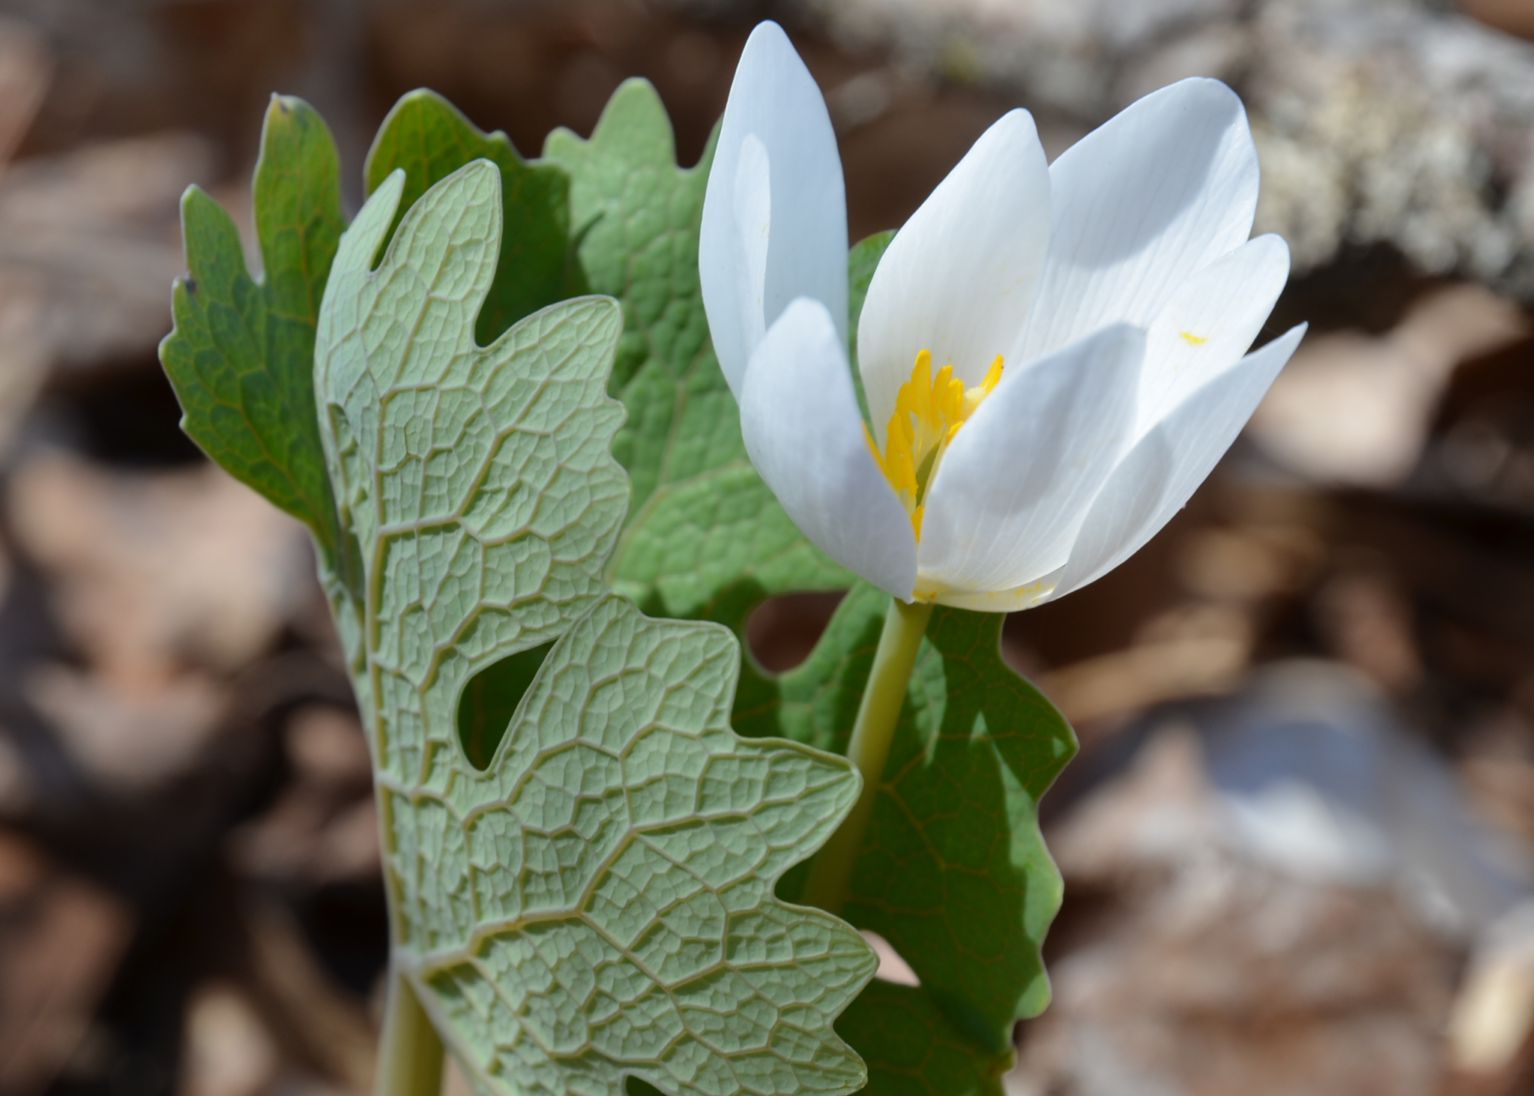 Single half-closed white flower, and large, lobed leaf.